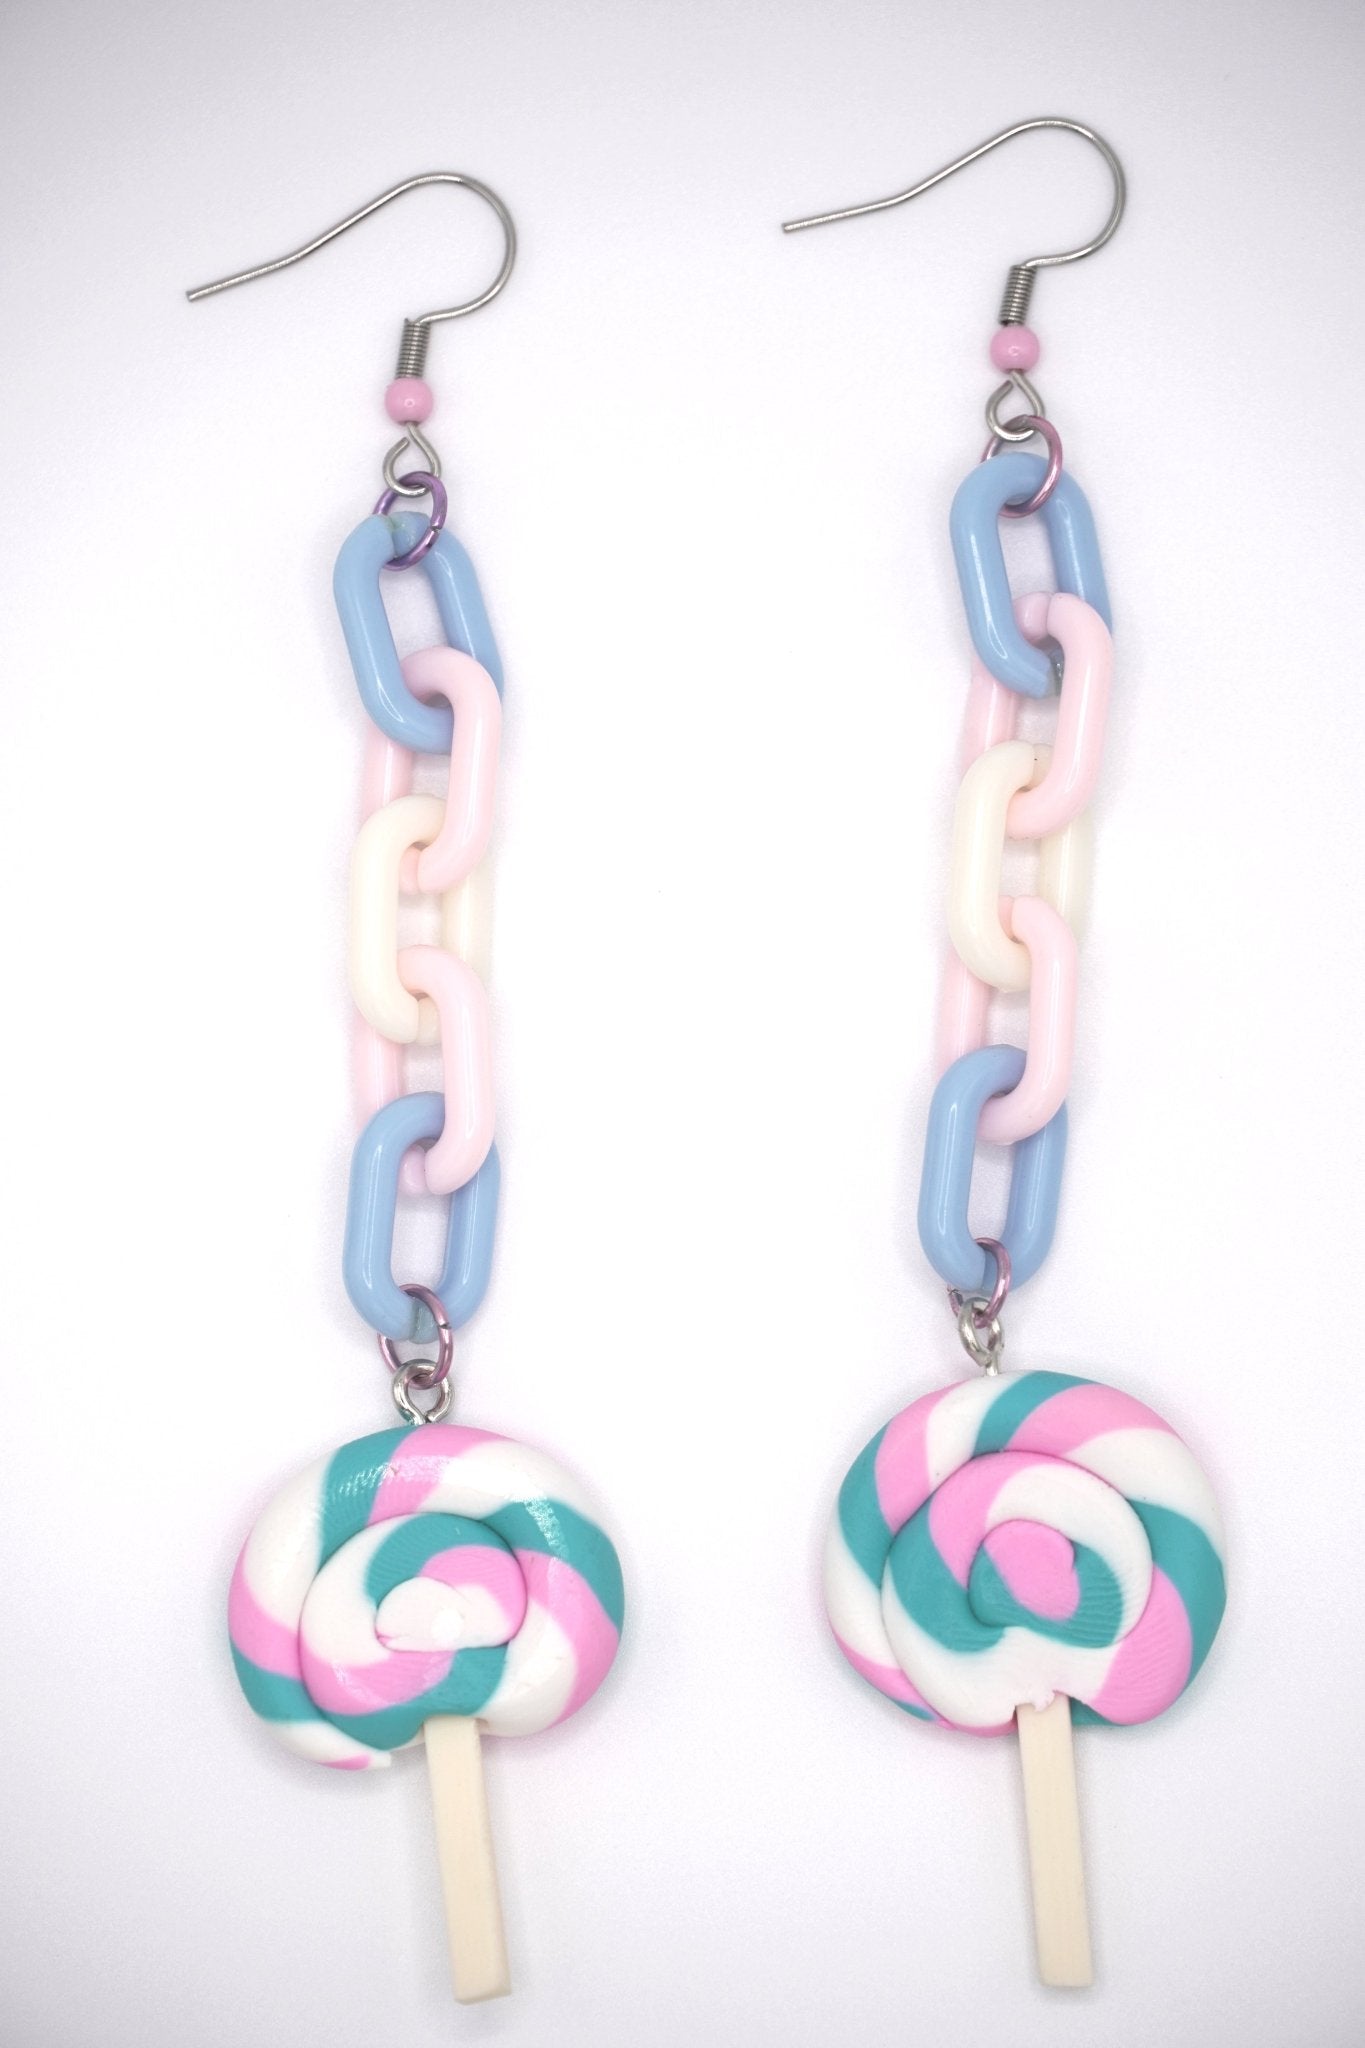 Trans Flag Colored Lollipop Earrings with Pastel Chains, Trans Pride Earrings, LGBTQ Pride Month - Dekowaii Jewelry Company